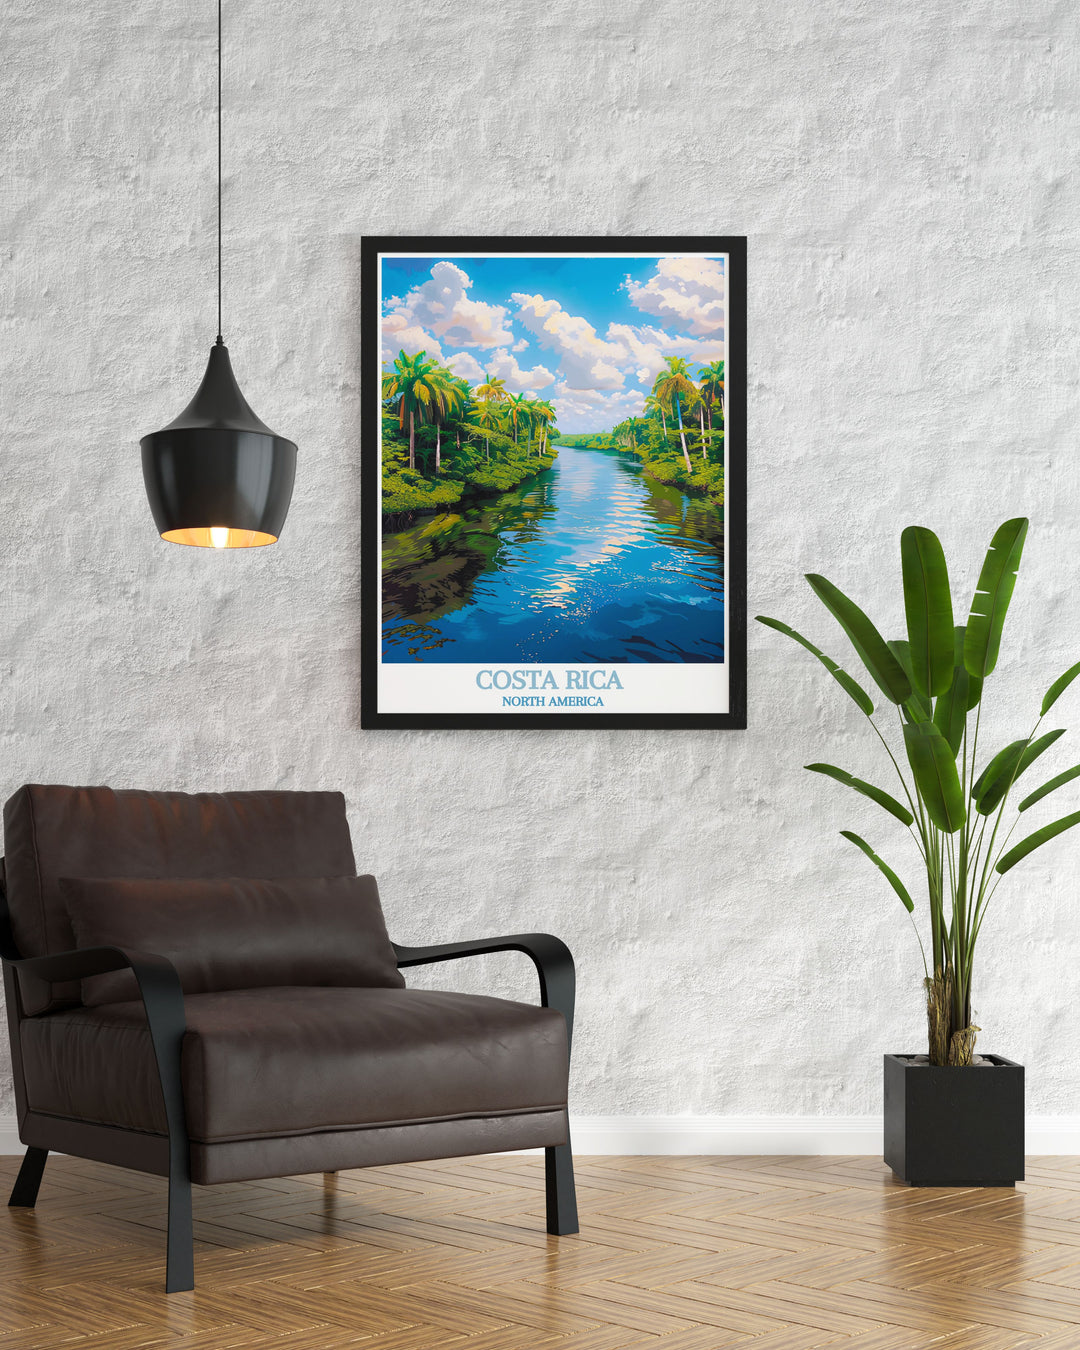 High quality print of Tortuguero National Park and Saint Teresa in Costa Rica, capturing the stunning landscapes and rich culture of this unique area. Ideal for art lovers who appreciate both nature and adventure.